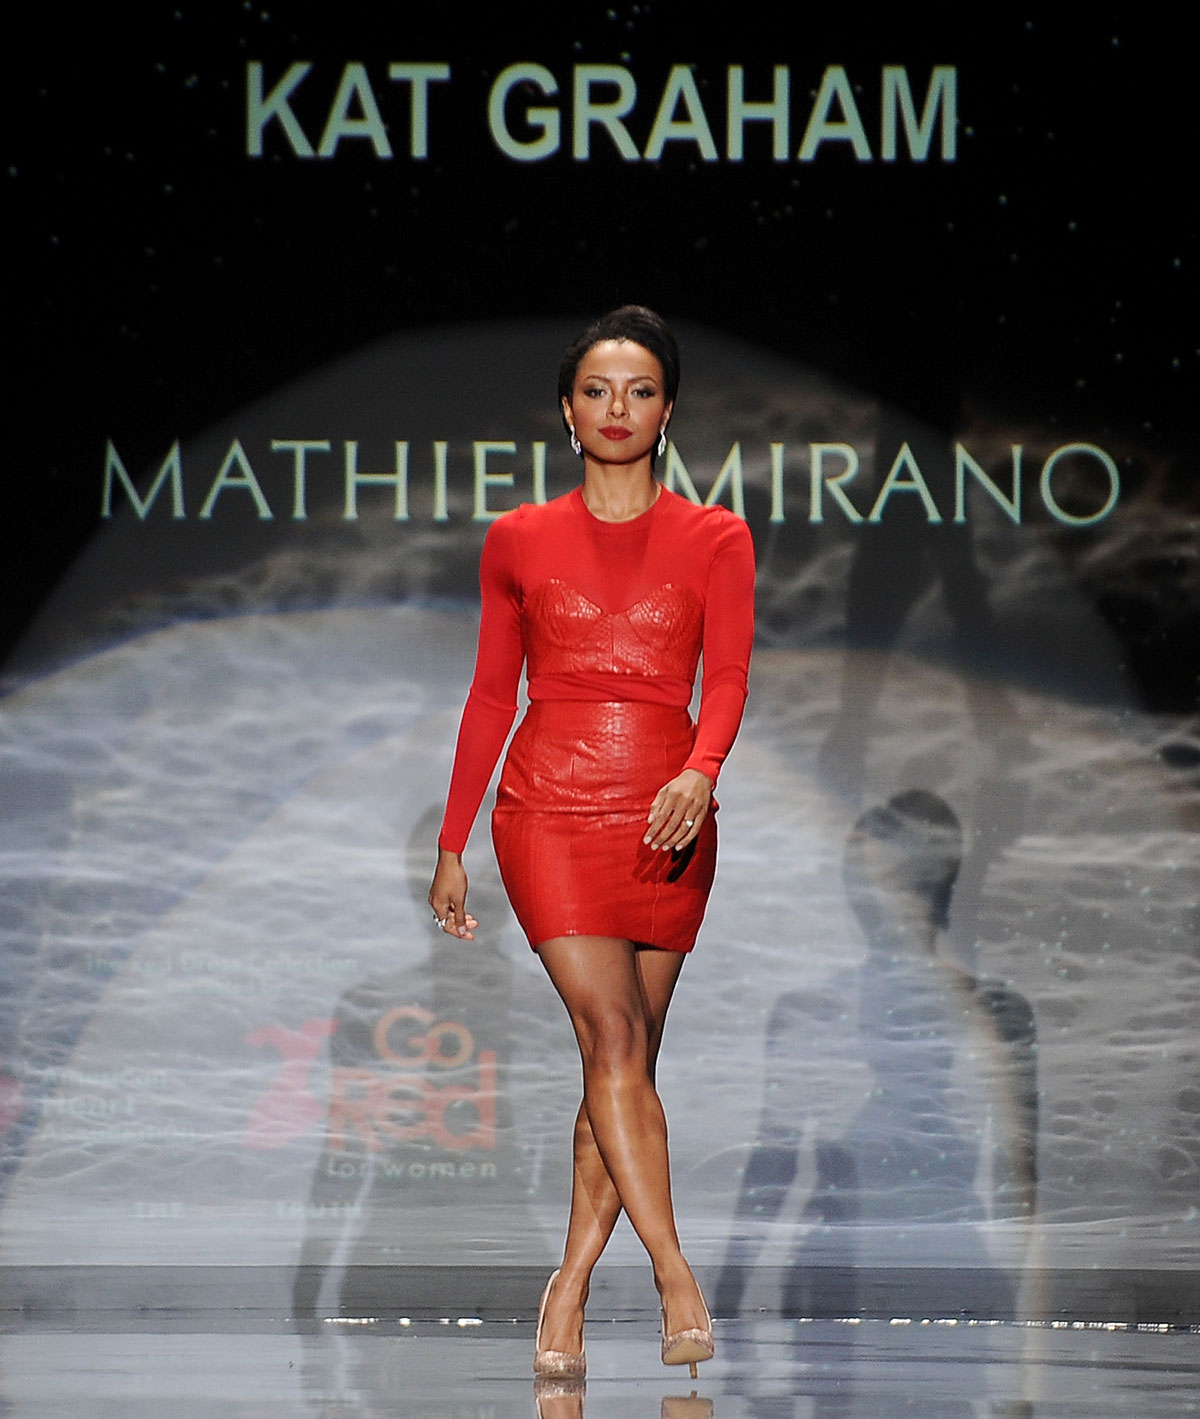 Kat Graham attends Go Red For Women The Heart Truth Red Dress